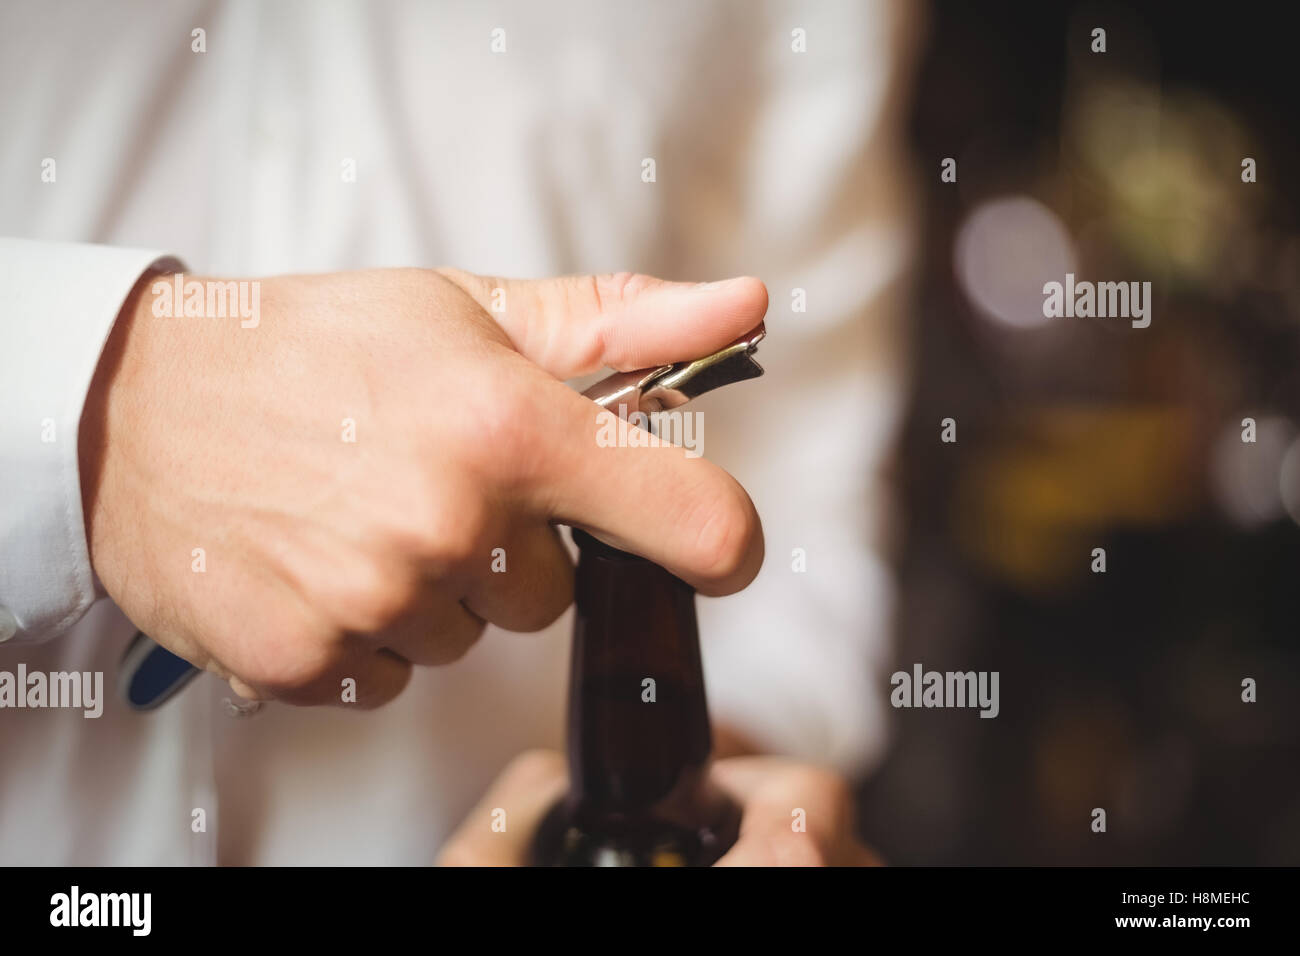 Close-up of bartender opening a beer bottle Stock Photo